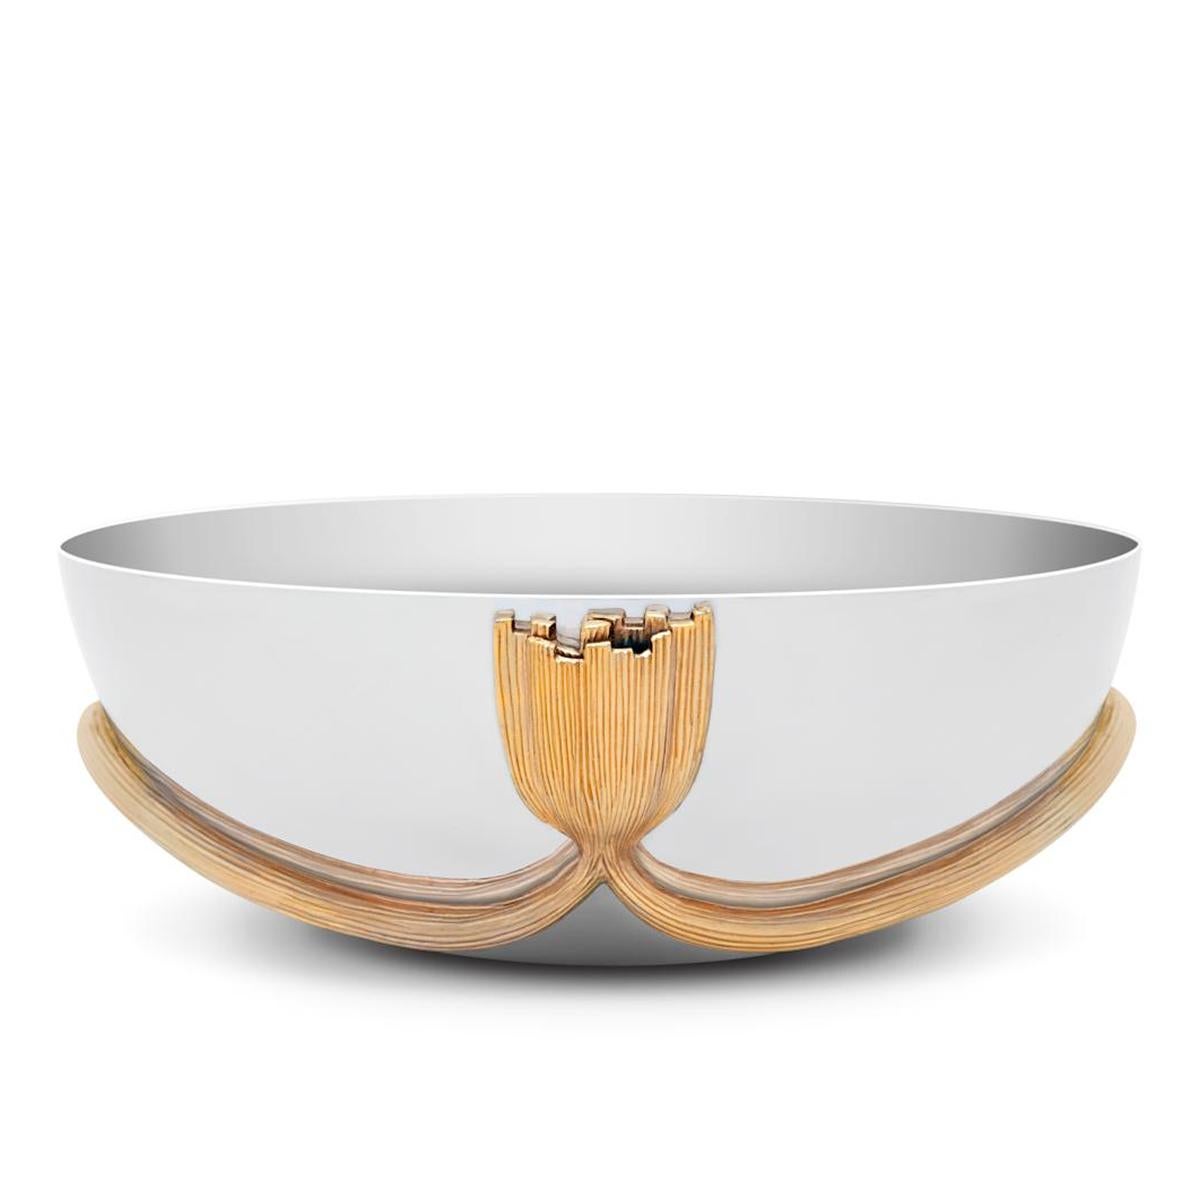 Bowl gold stalk large in polished stainless
steel with 24-karat gold-plated stalk. Delivered
in a luxury gift box.